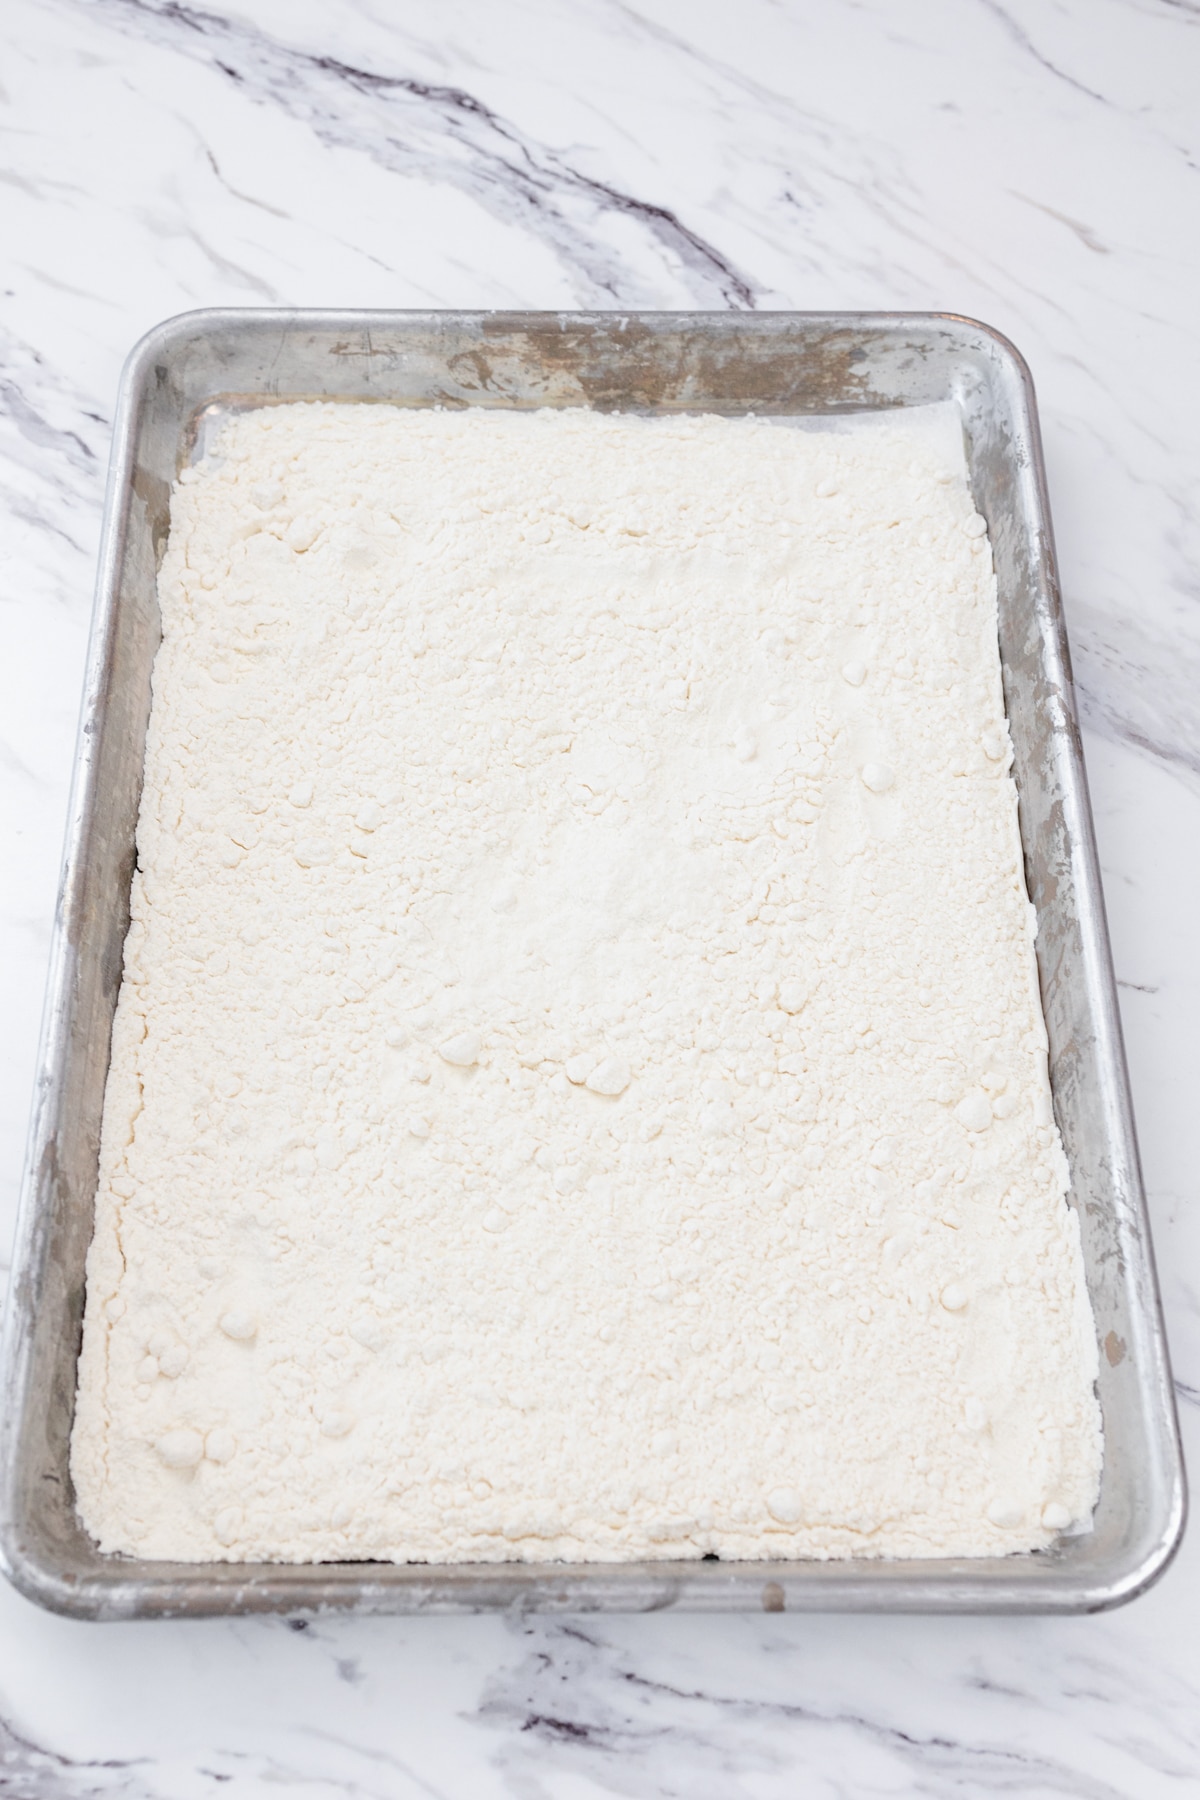 Top view of flour cooling on a parchment-lined baking sheet.